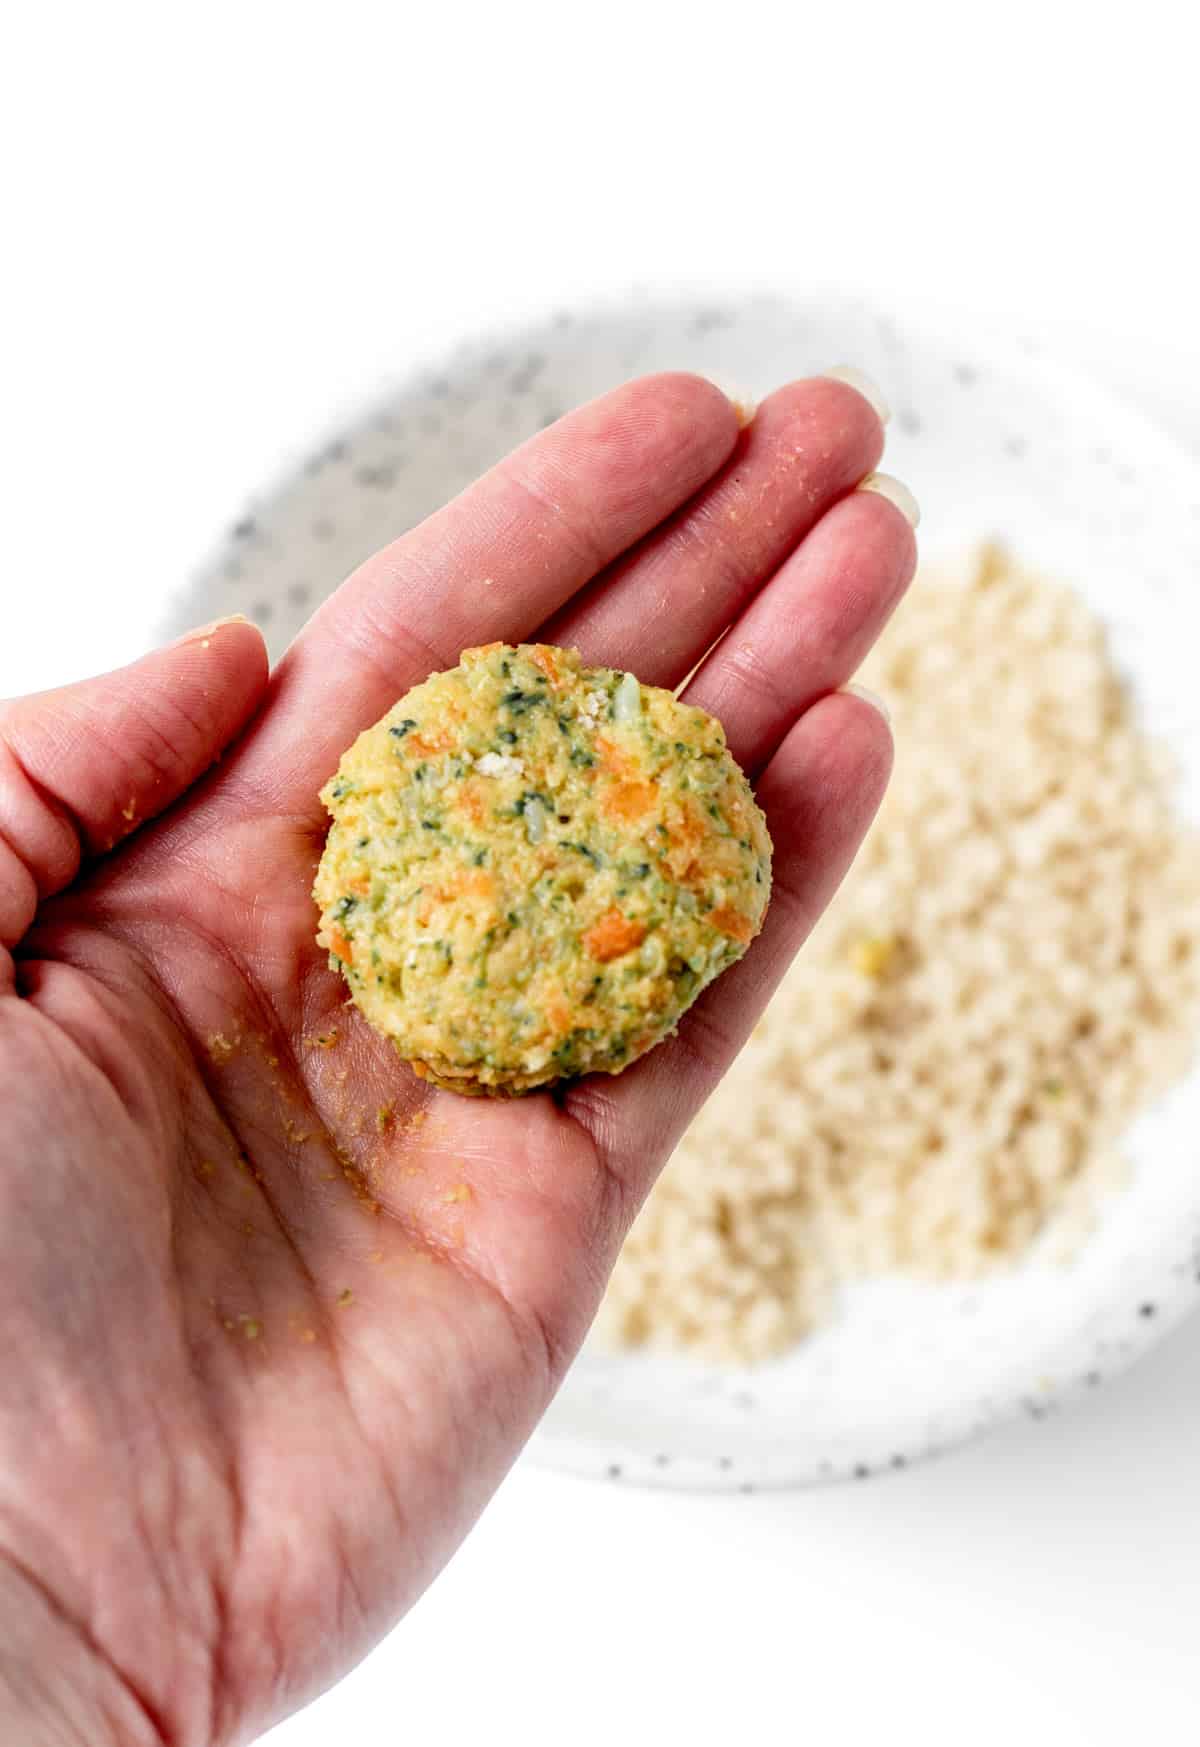 A flattened, round patty of the chickpea veggie mixture in someone's hand.